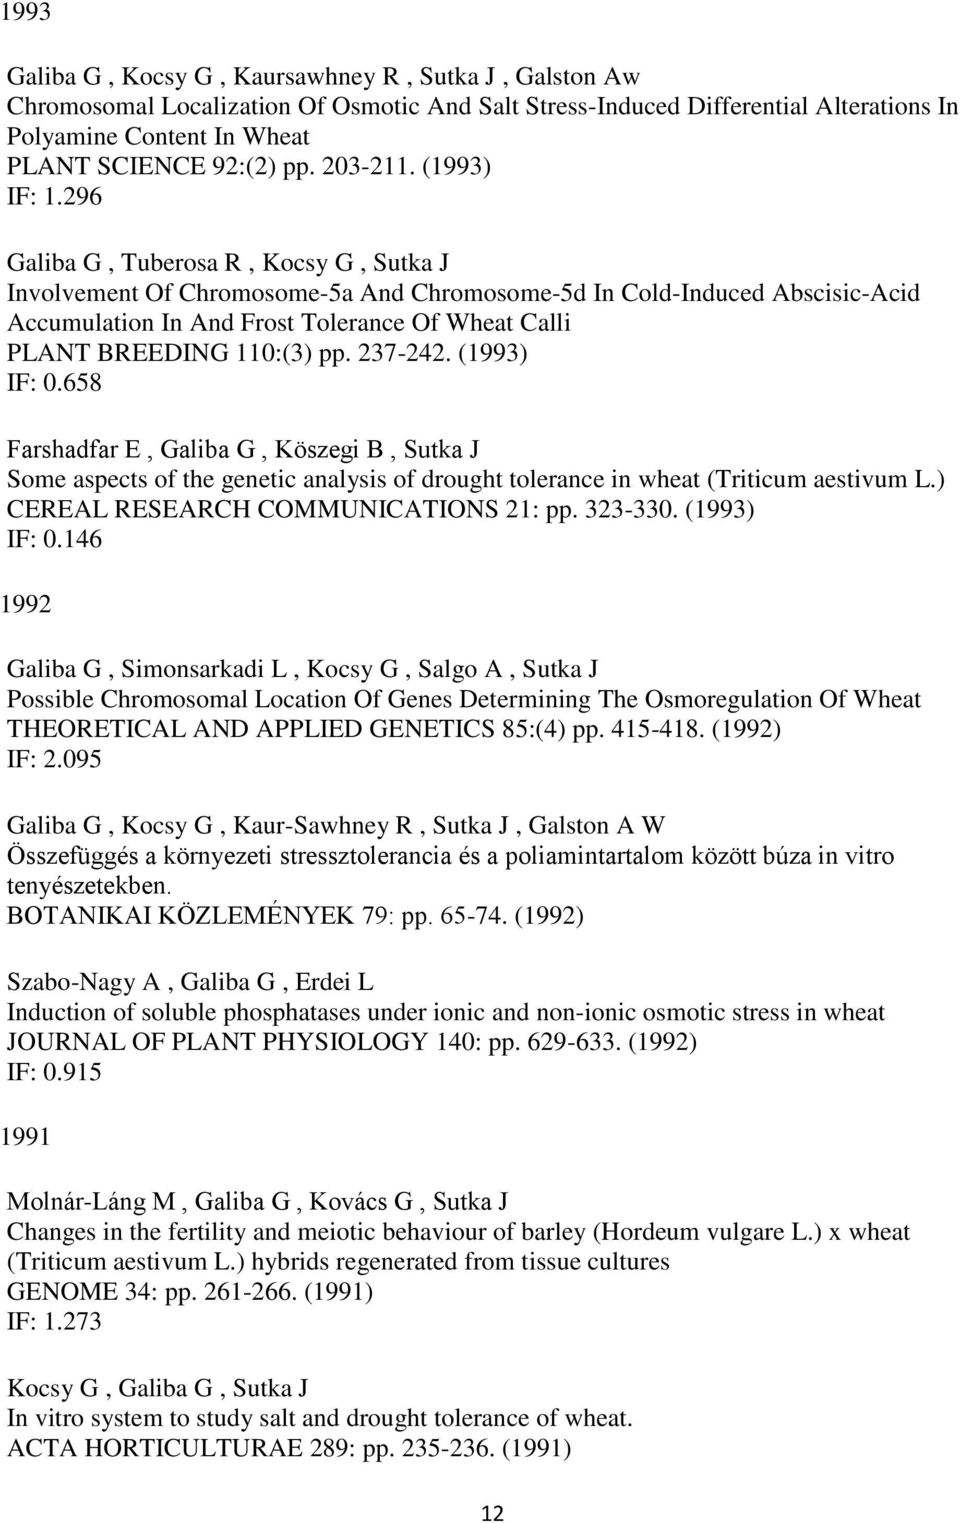 296 Galiba G, Tuberosa R, Kocsy G, Sutka J Involvement Of Chromosome-5a And Chromosome-5d In Cold-Induced Abscisic-Acid Accumulation In And Frost Tolerance Of Wheat Calli PLANT BREEDING 110:(3) pp.